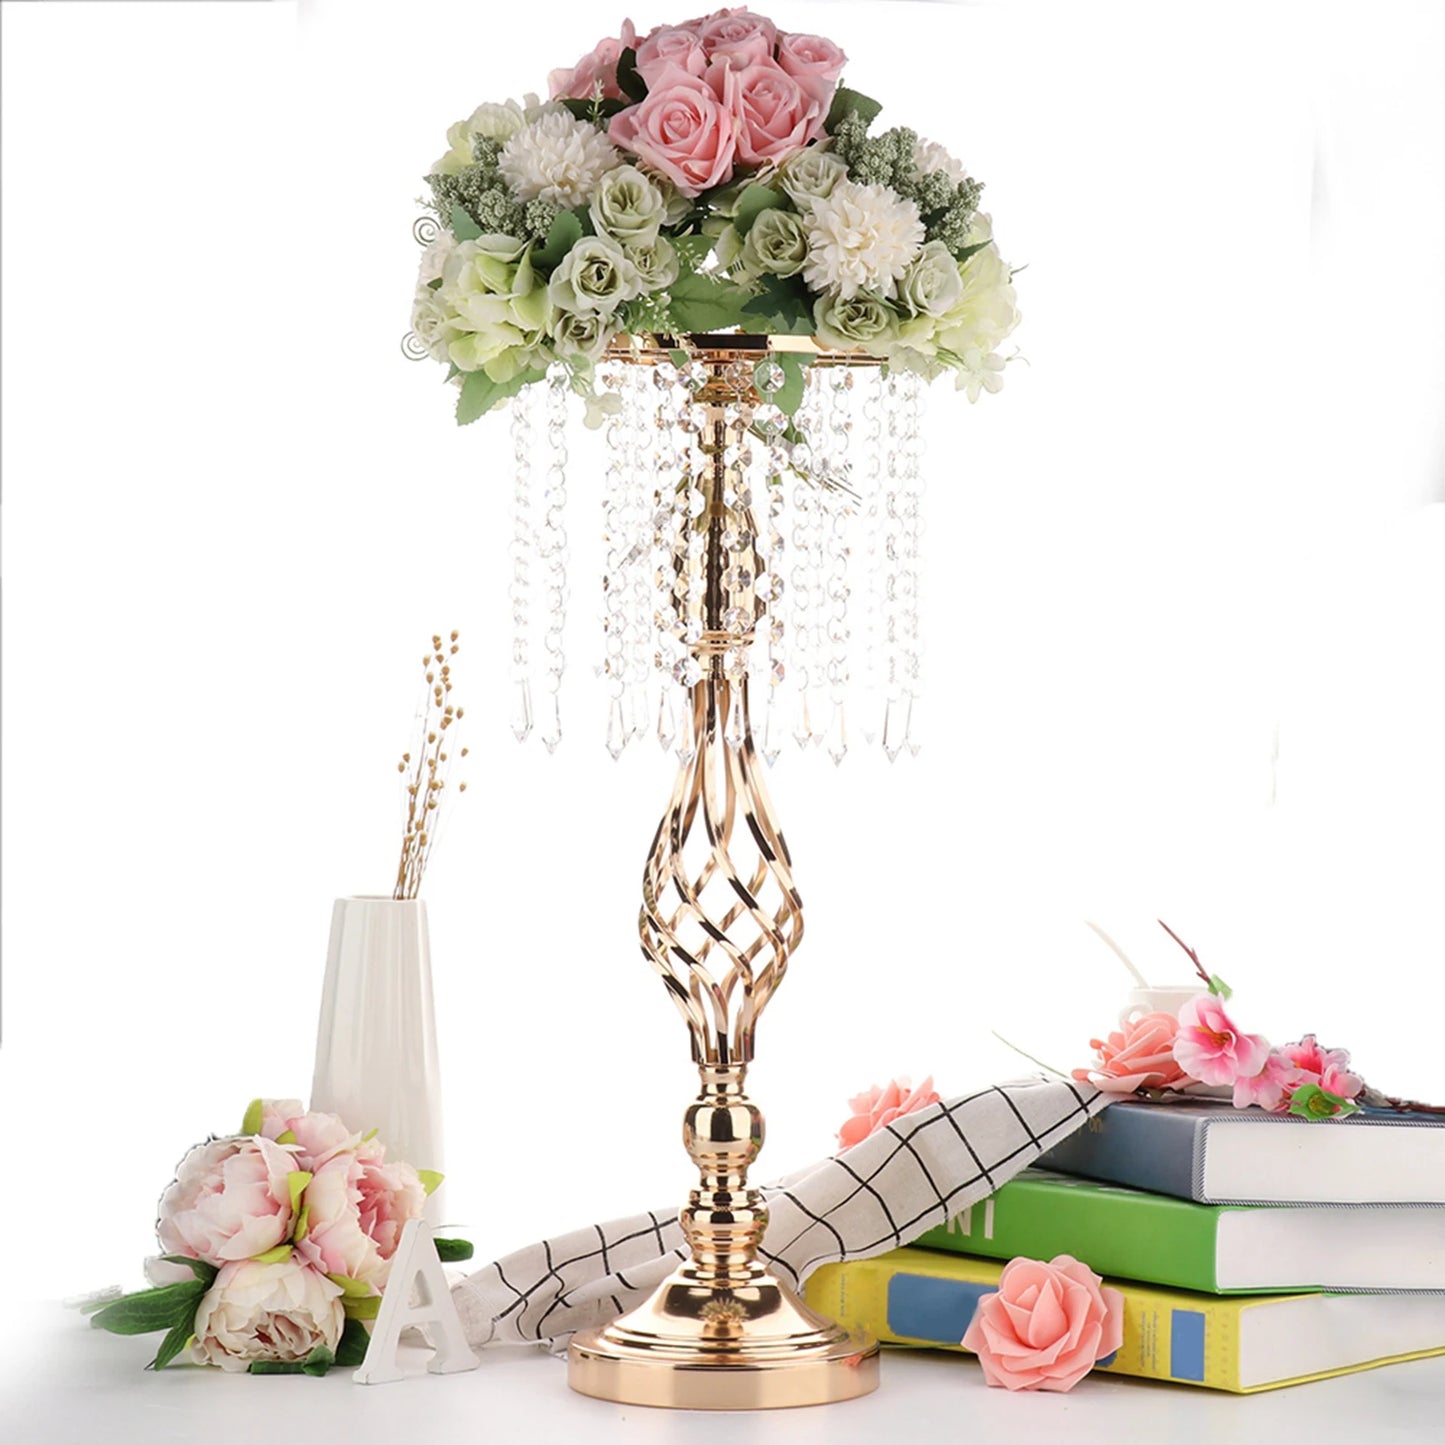 Versatile Candles Holder Table Wedding Flower Vase Stand Candlesticks Tealight Candle Holders Home Party Holiday Table Decor